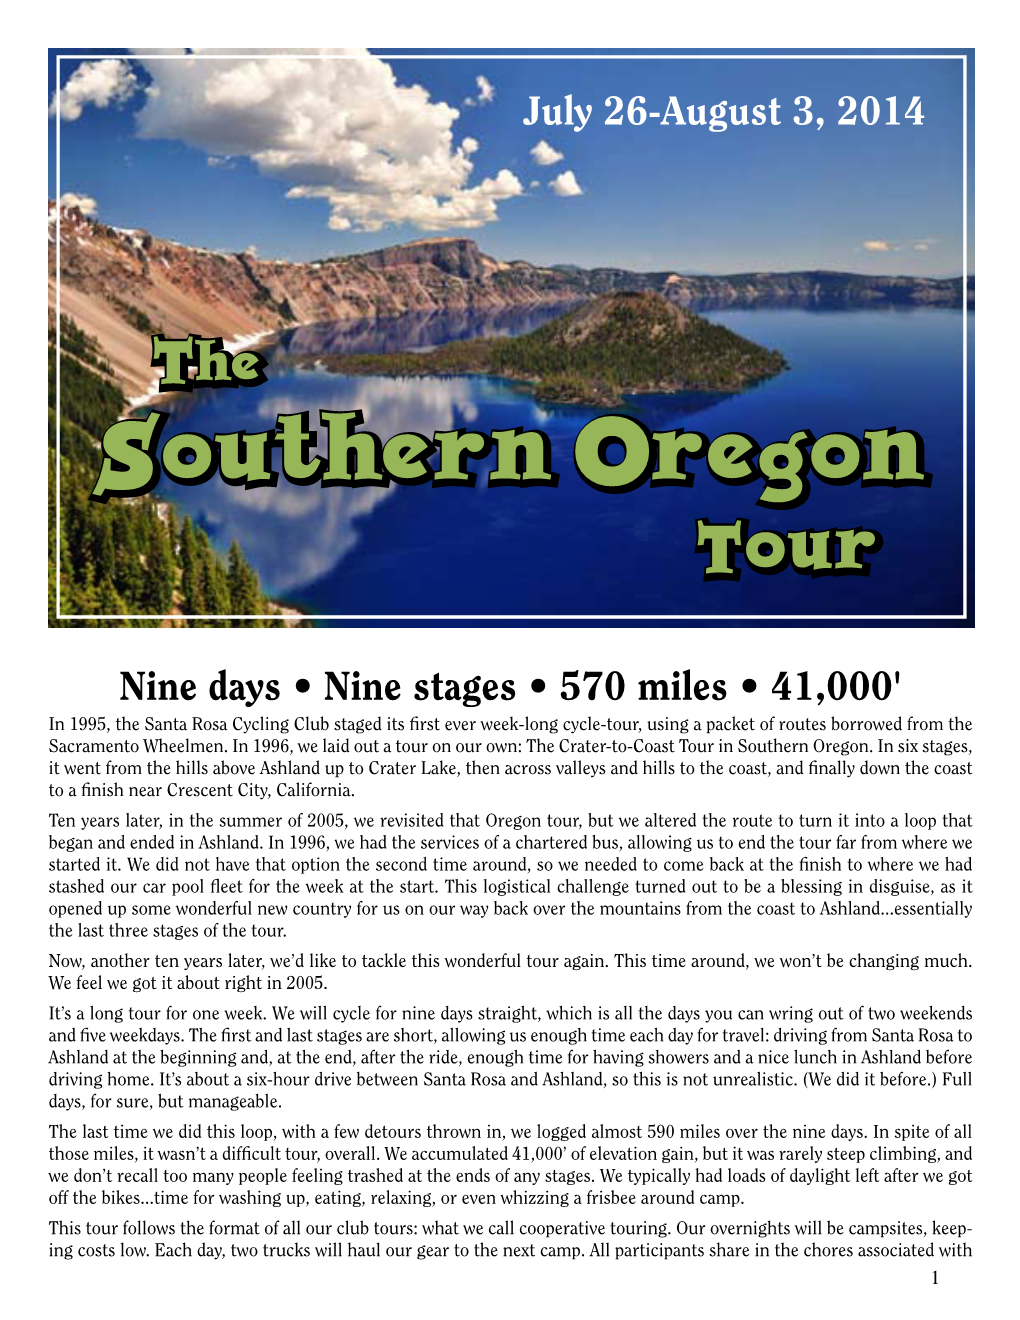 Crater Lake, Then Across Valleys and Hills to the Coast, and Finally Down the Coast to a Finish Near Crescent City, California